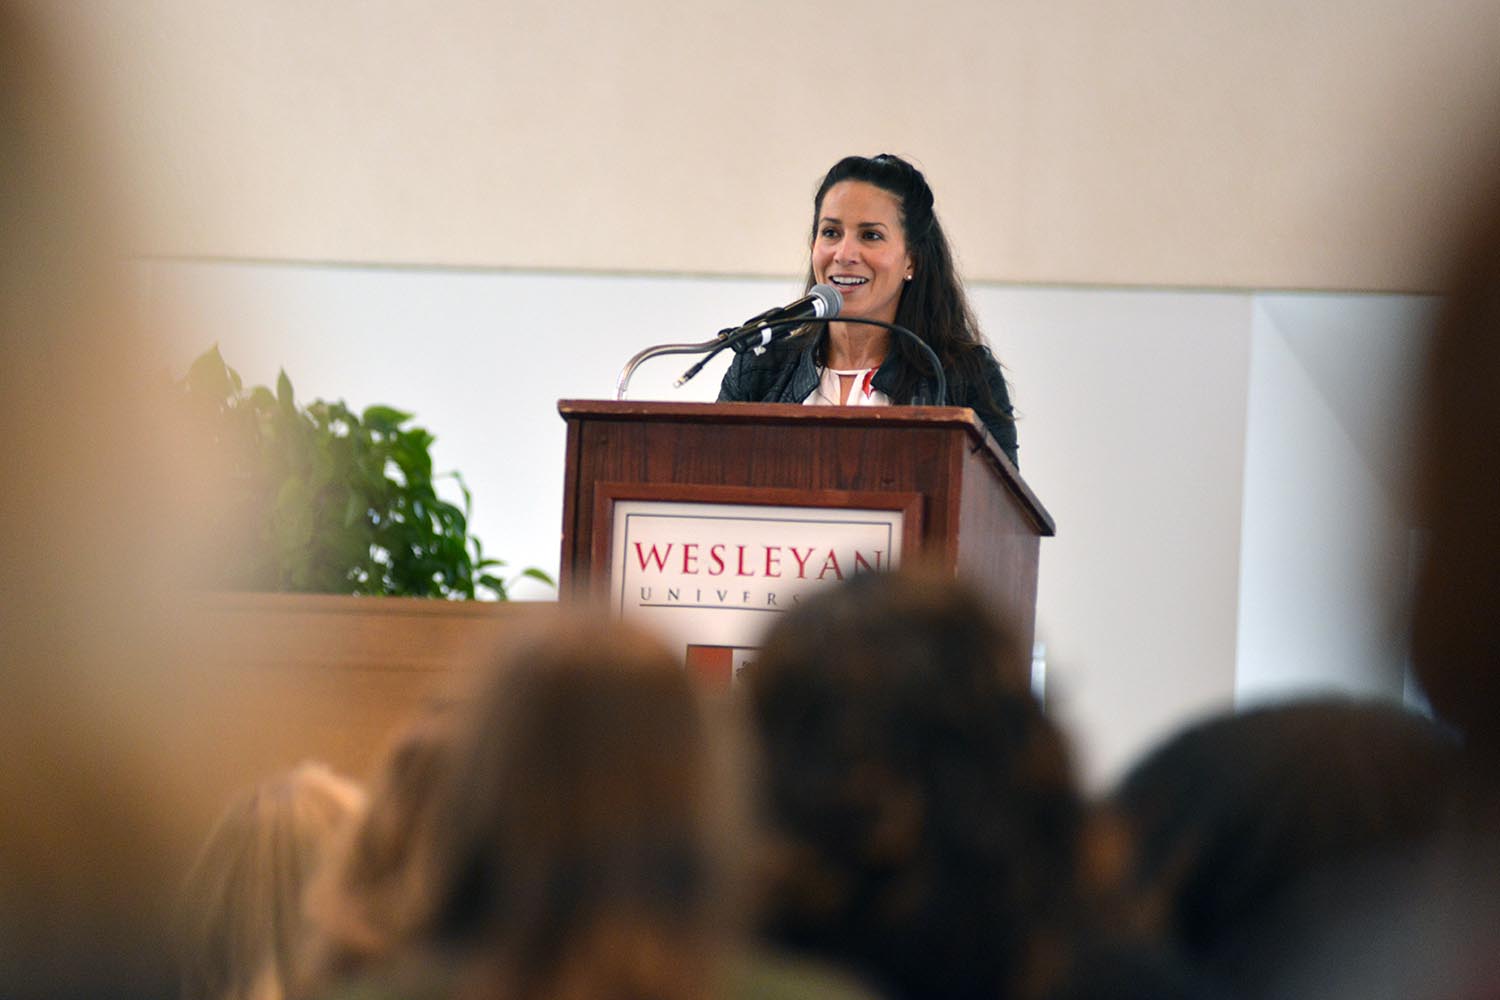 Wesleyan alumnae and New York Mets public address announcer Marysol Castro '96 delivered the WesFest Alumni Keynote Address on April 11. Castro, the first Latina public address announcer in the entire MLB, also the host of The Weekly Good on OGTV and the wildly popular CTBites Hot Dish podcast. In 2010, Castro anchored weather at CBS's The Early Show. She spent two years at ESPN as a host and sideline reporter for the Little League World Series, Invictus Games, and Premier Boxing Champions.